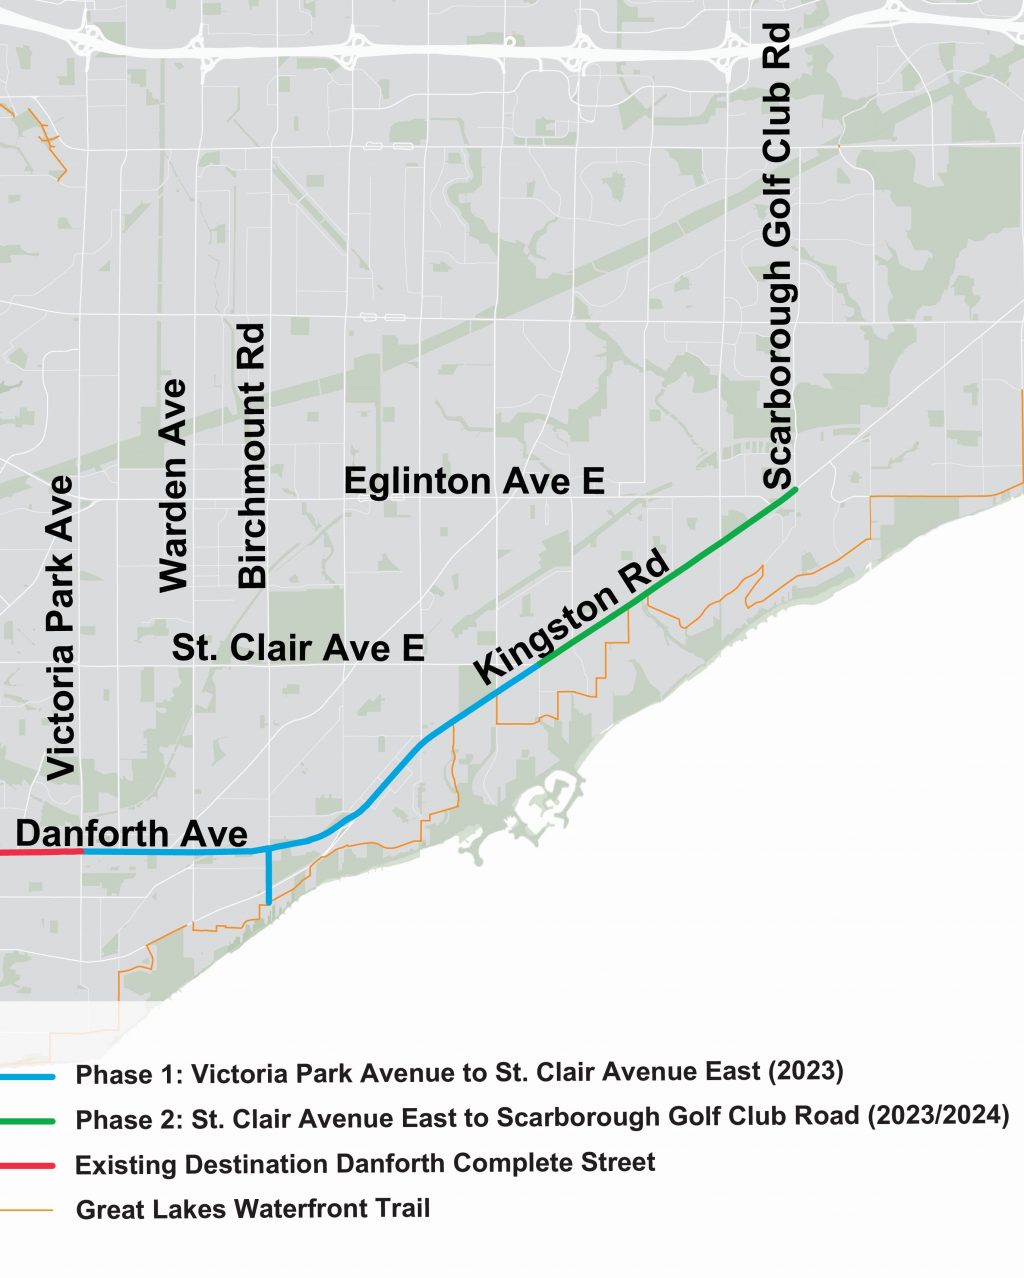 Map of the project area highlighting Danforth Avenue (Victoria Park Avenue to Kingston Road) and Kingston Road (Danforth Avenue to Scarborough Golf Club Road).